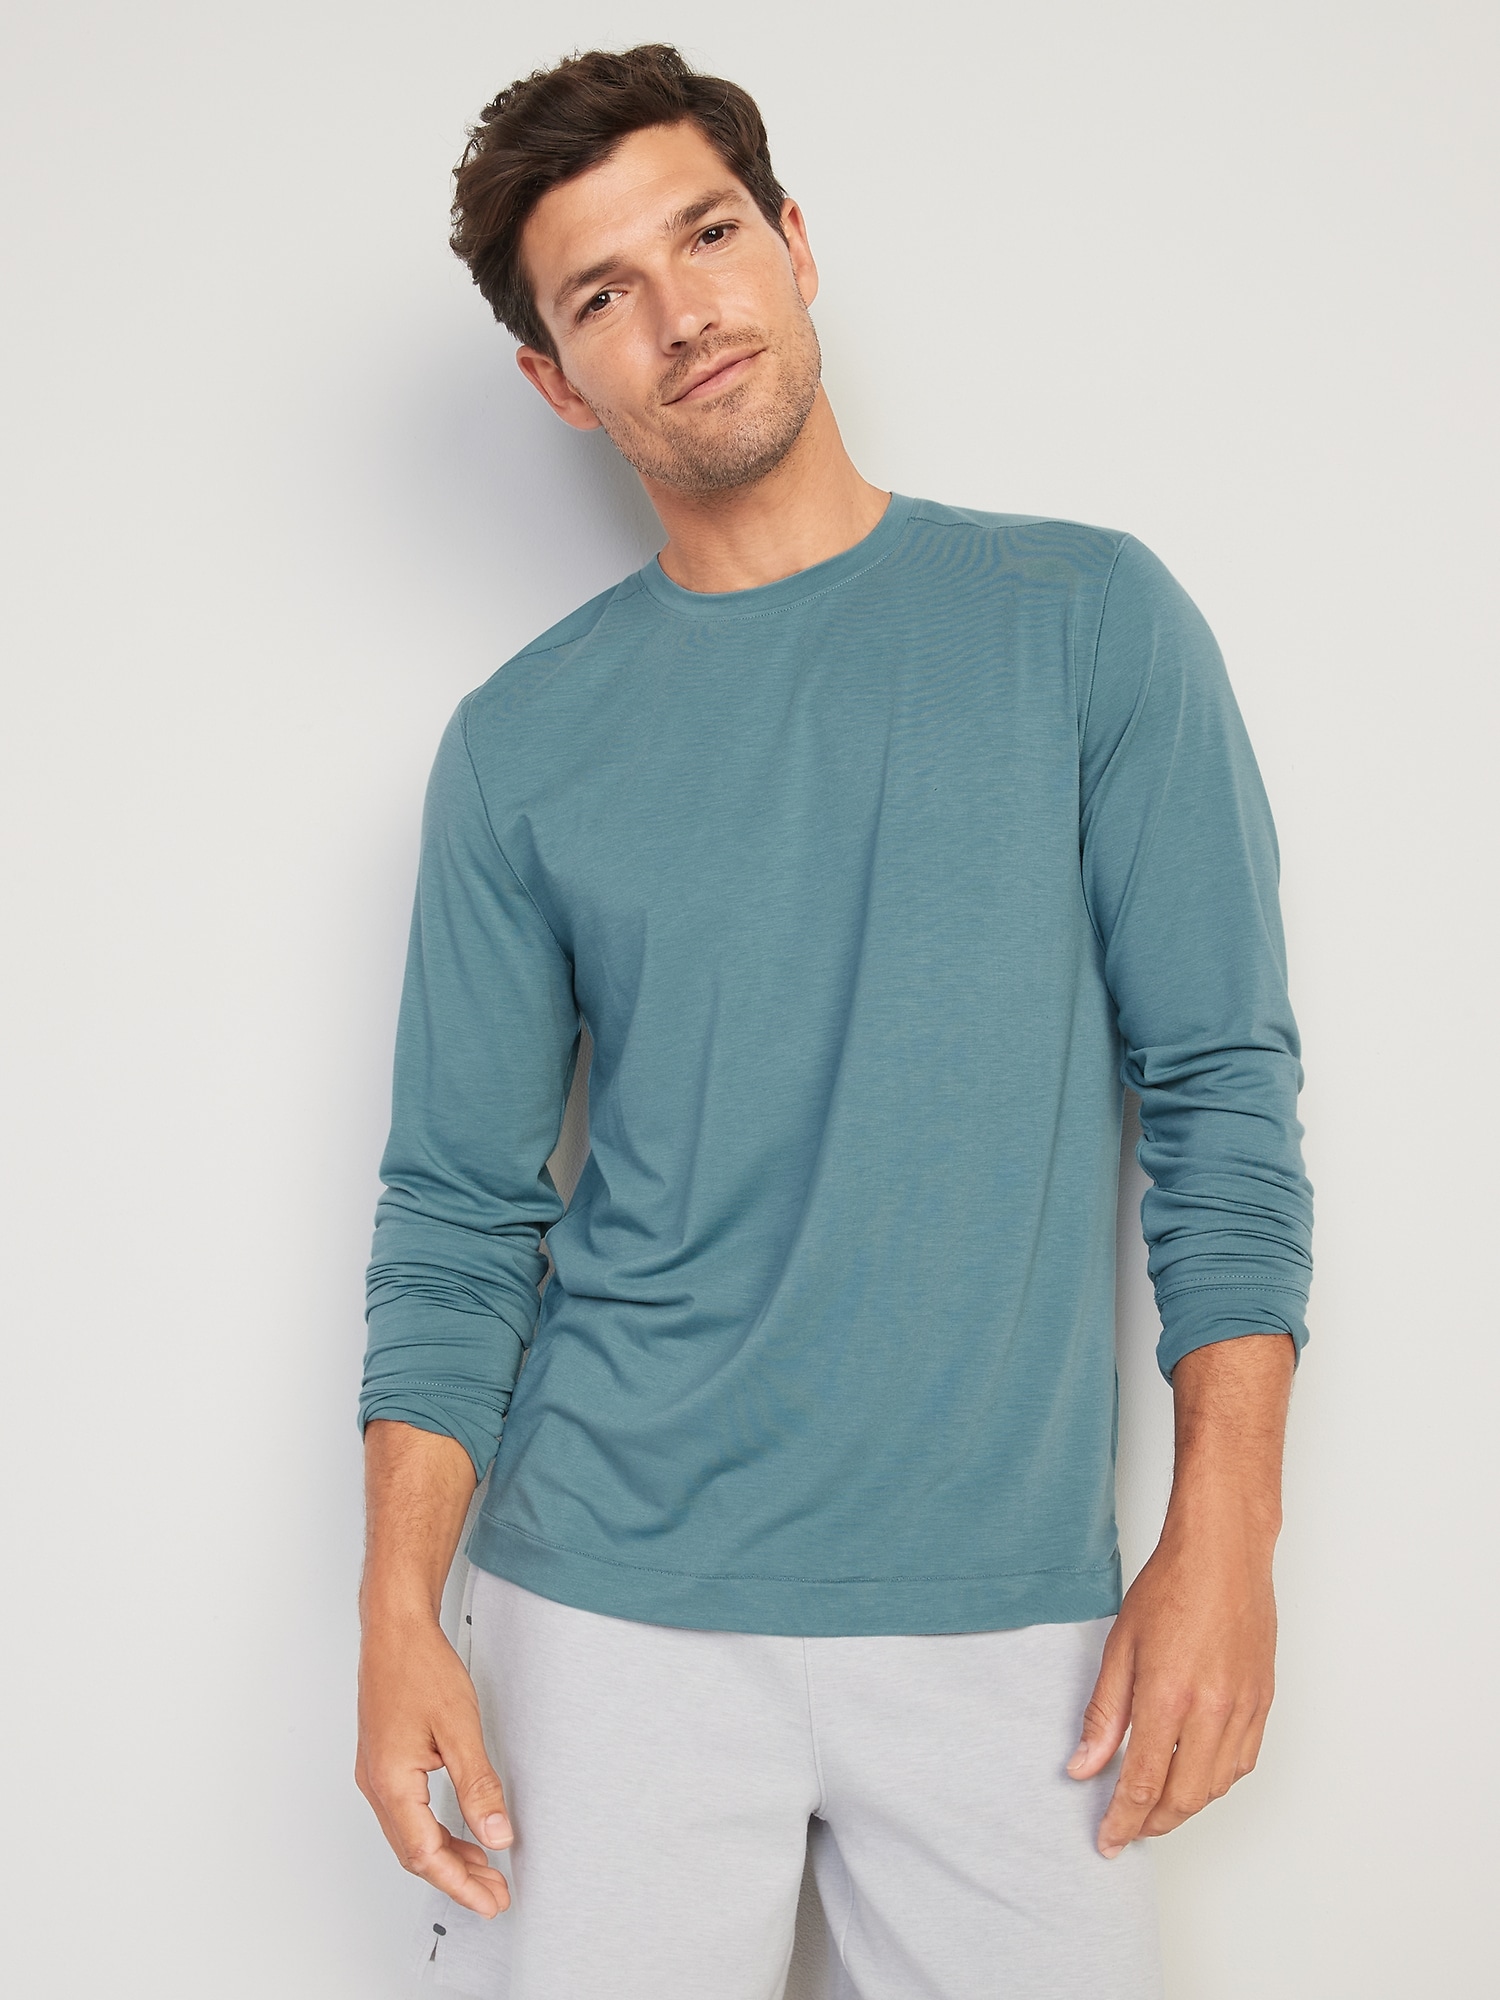 Old Navy Beyond 4-Way Stretch Long-Sleeve T-Shirt for Men blue. 1